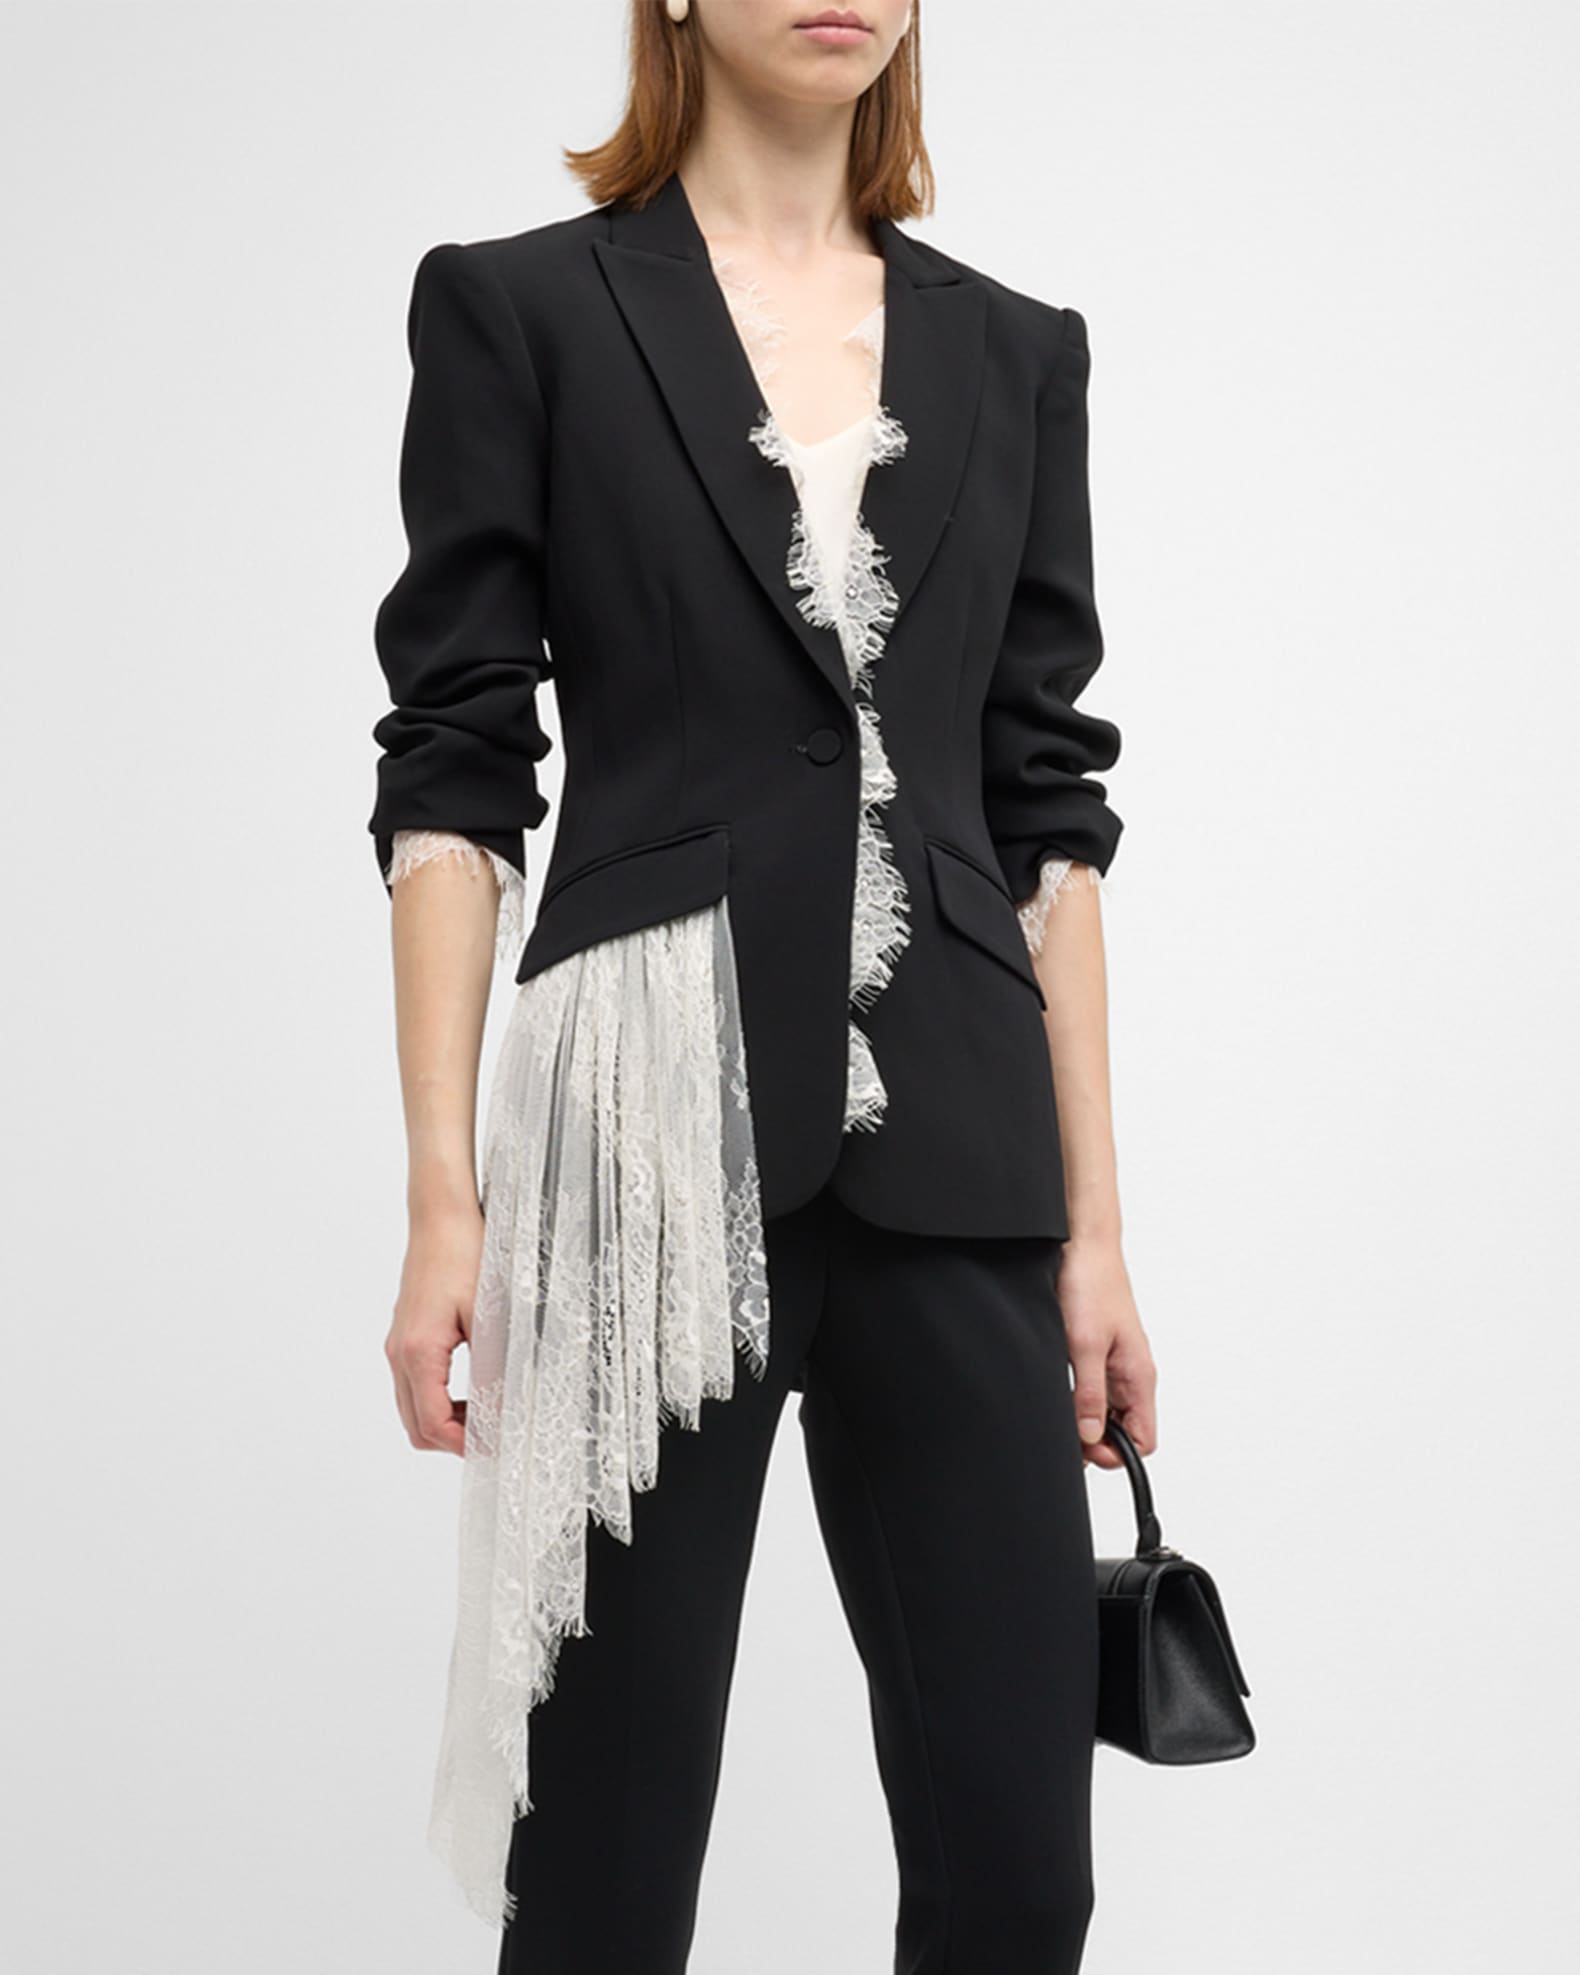 Cinq a Sept Keeves Scrunched-Sleeve Lace Embellished Blazer | Neiman Marcus